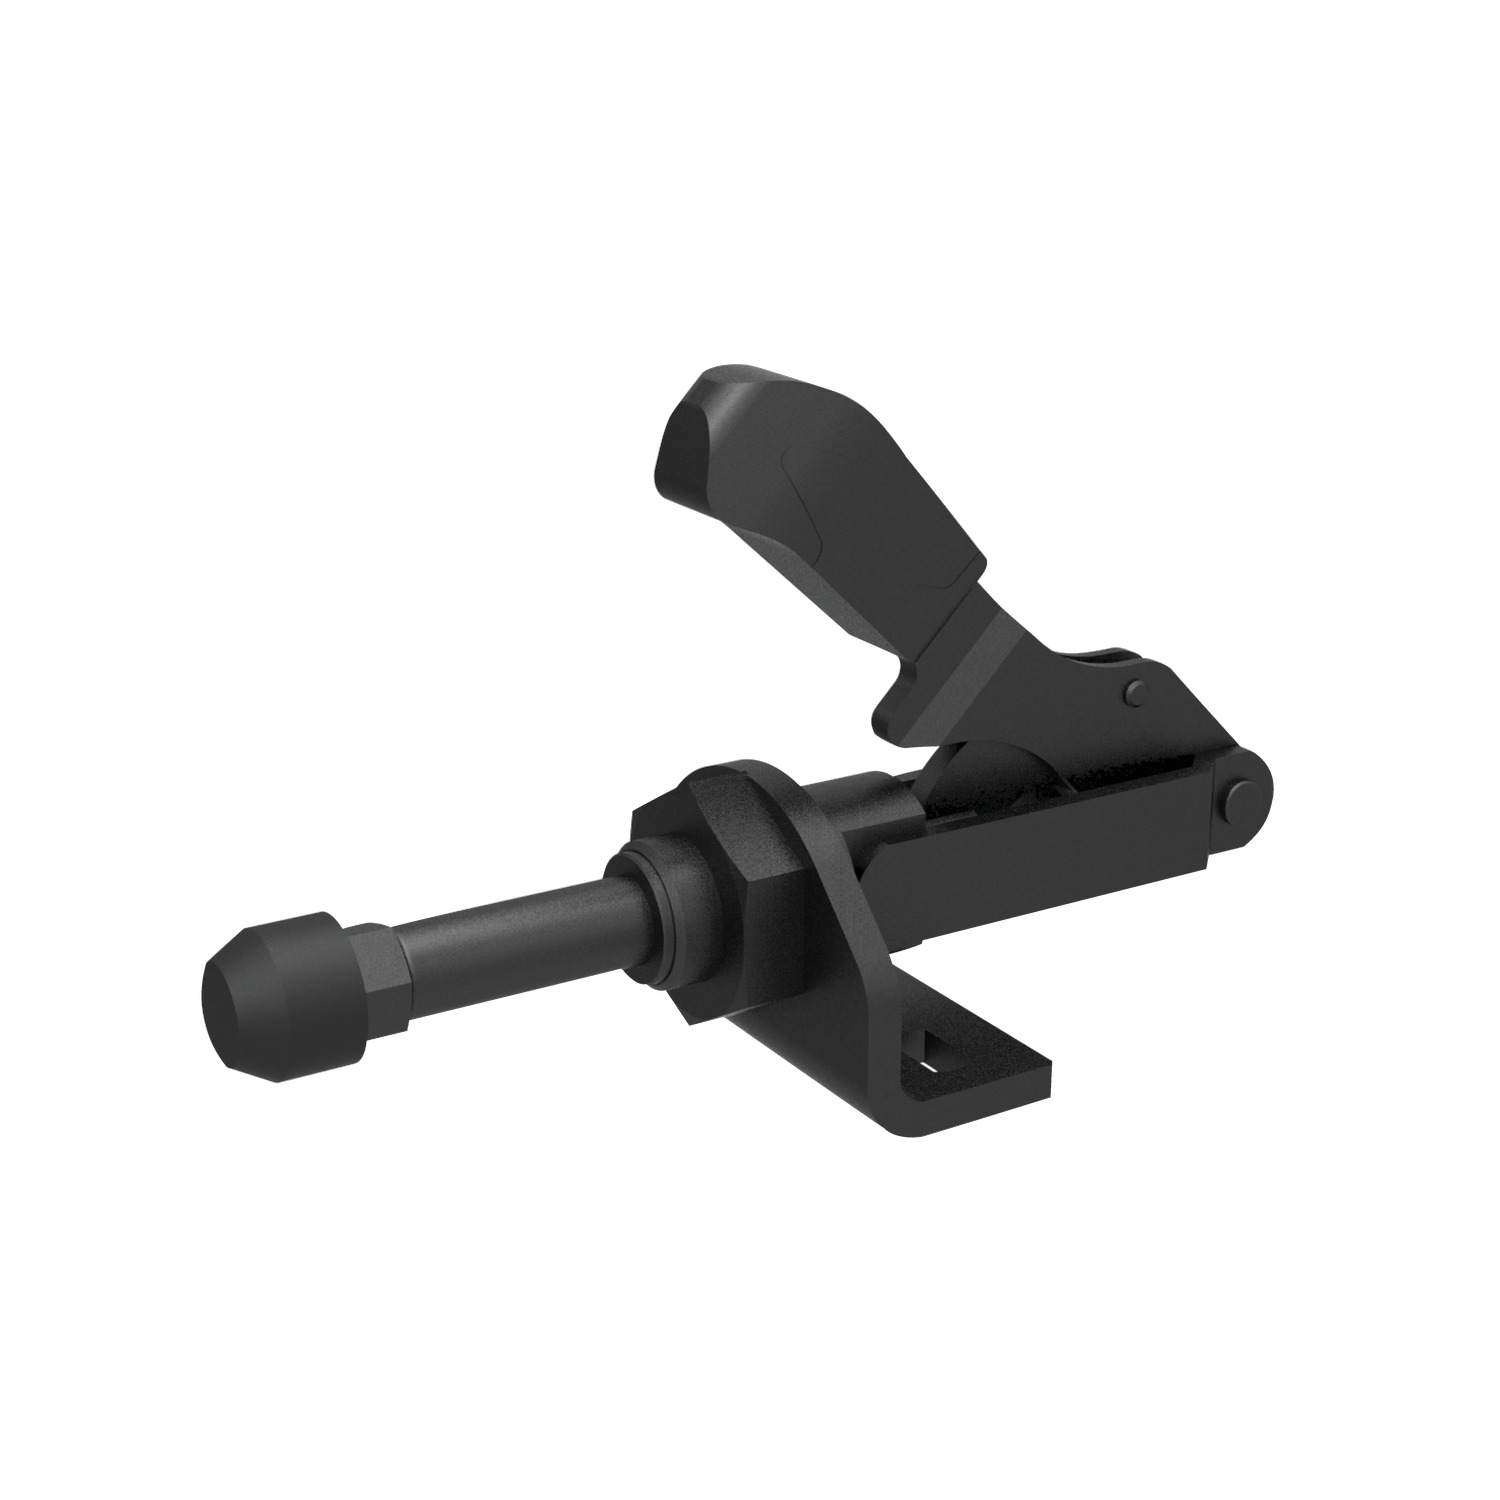 Product 42000.2, Push-Pull Type Toggle Clamps - Black for optical measuring equipment / 